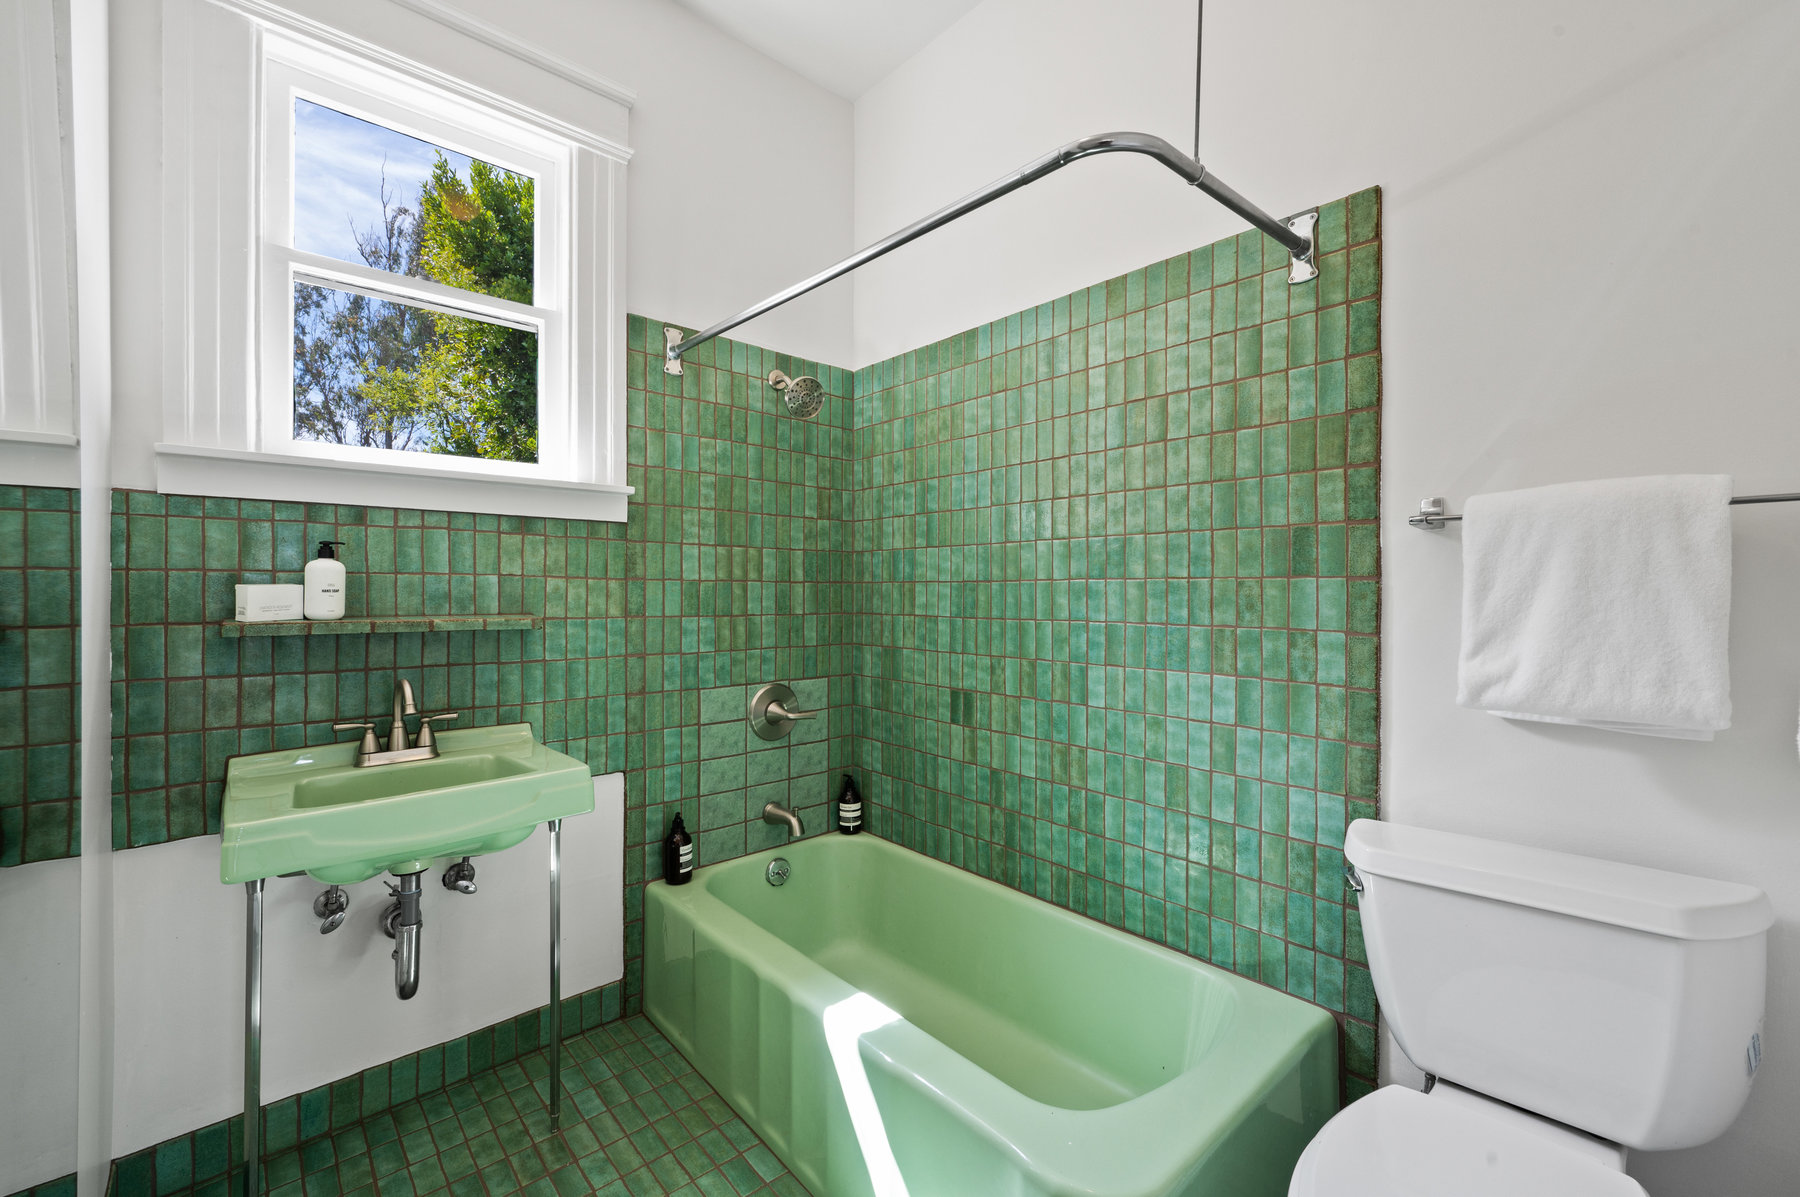 Property Photo: Guest bathroom has green Heath Tile floors and wall around tub and sink. 